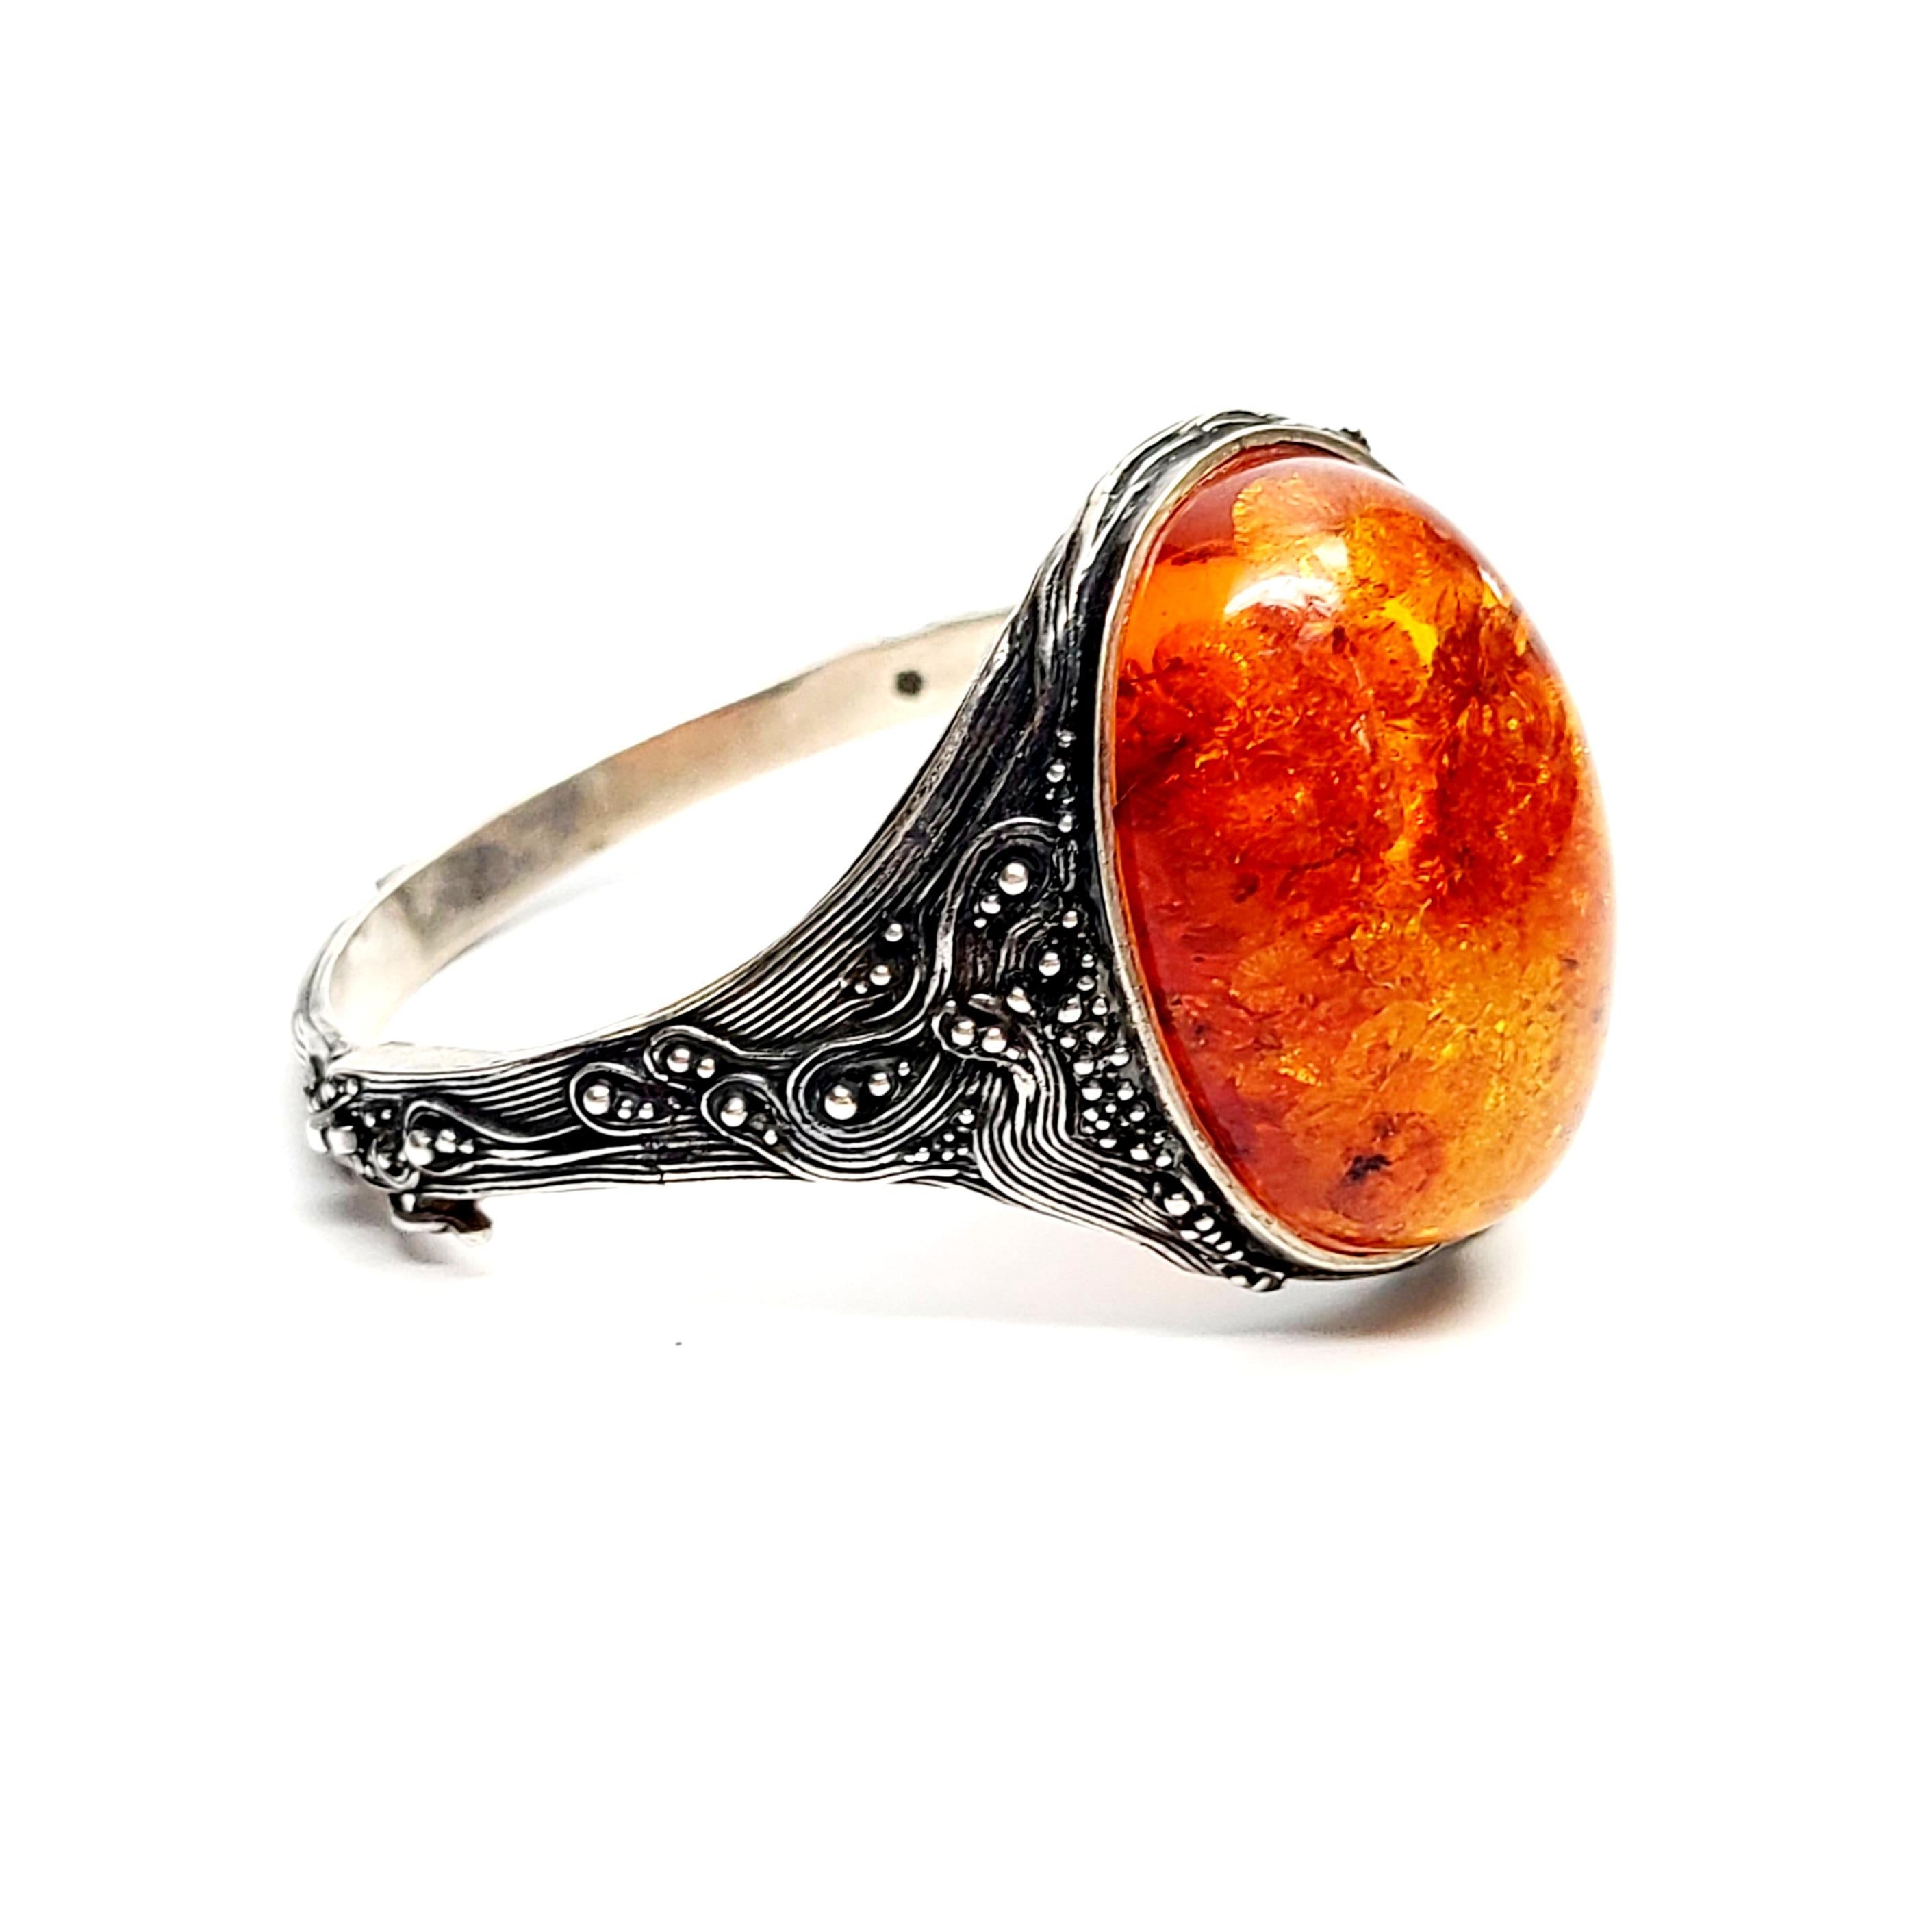 Vintage silver textured hinged bangle bracelet with large oval amber stone.

This bracelet is a beautiful example of textured metalwork. Large oval shaped amber stone bezel set in front. An inconspicuous slide closure with safety clasp allows the